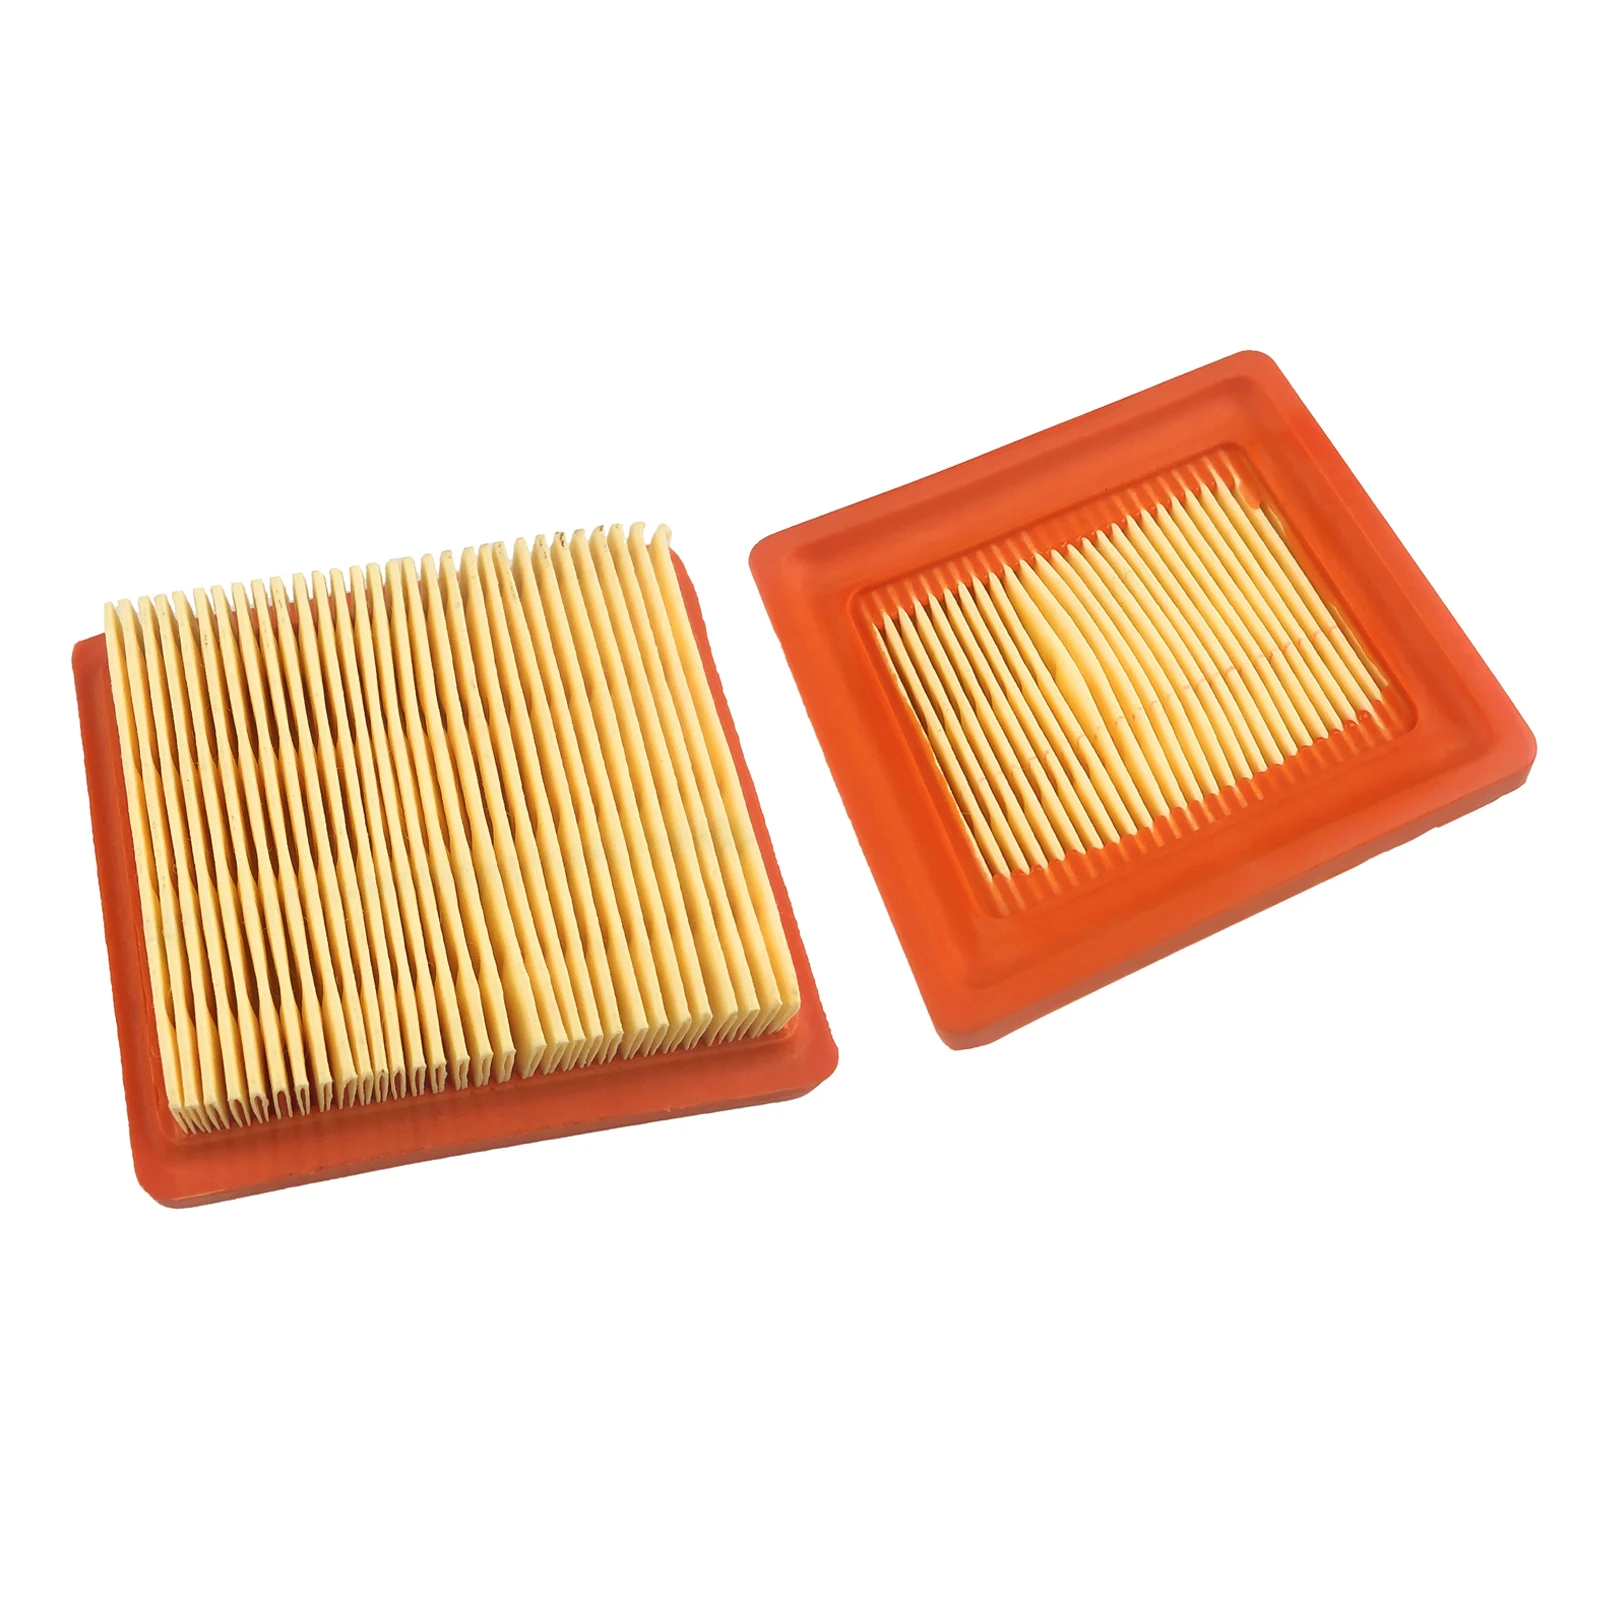 

2pcs/set Air Filter Panels Replace 15855 fits for Stihl 4180-141-0300B FS111 FS131 FS91 Garden Power Tools Repairing Accessories